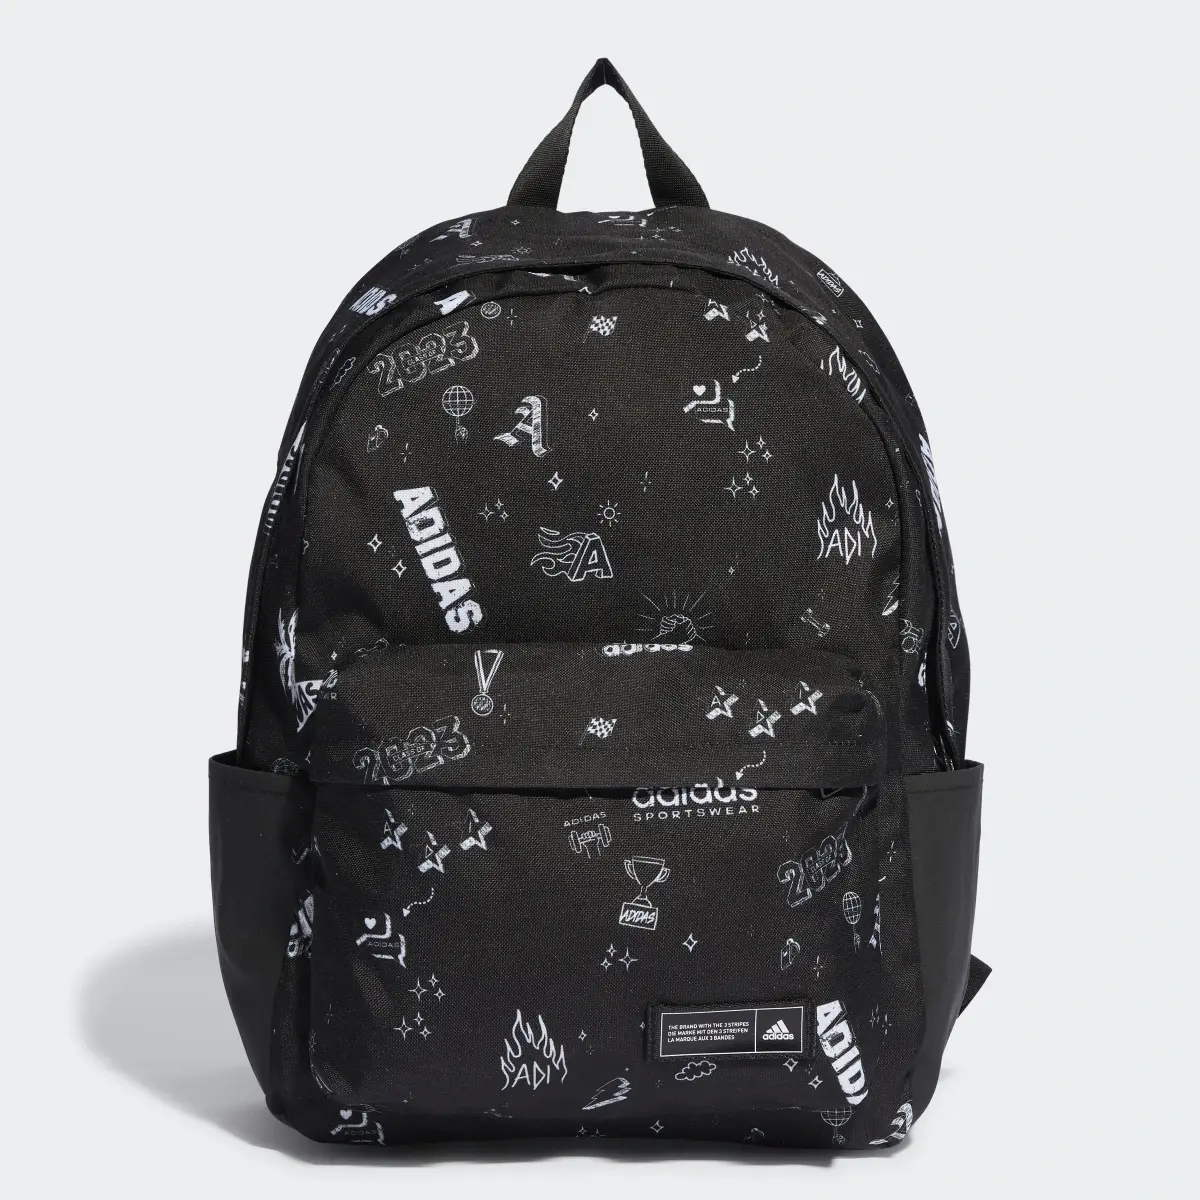 Adidas Classic Graphic Backpack. 2